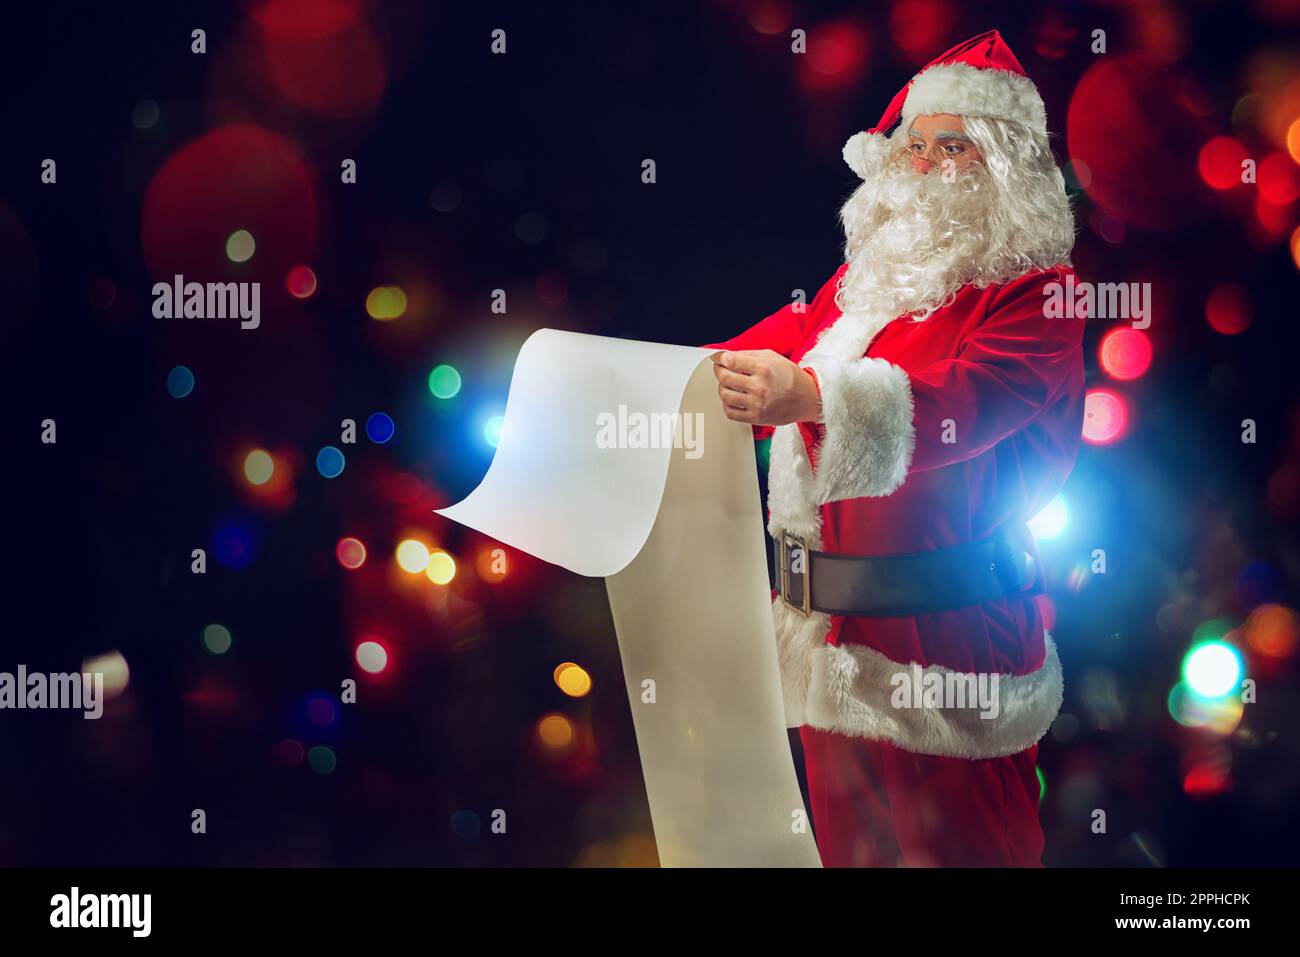 Santa Claus is full of presents request to delivery Stock Photo